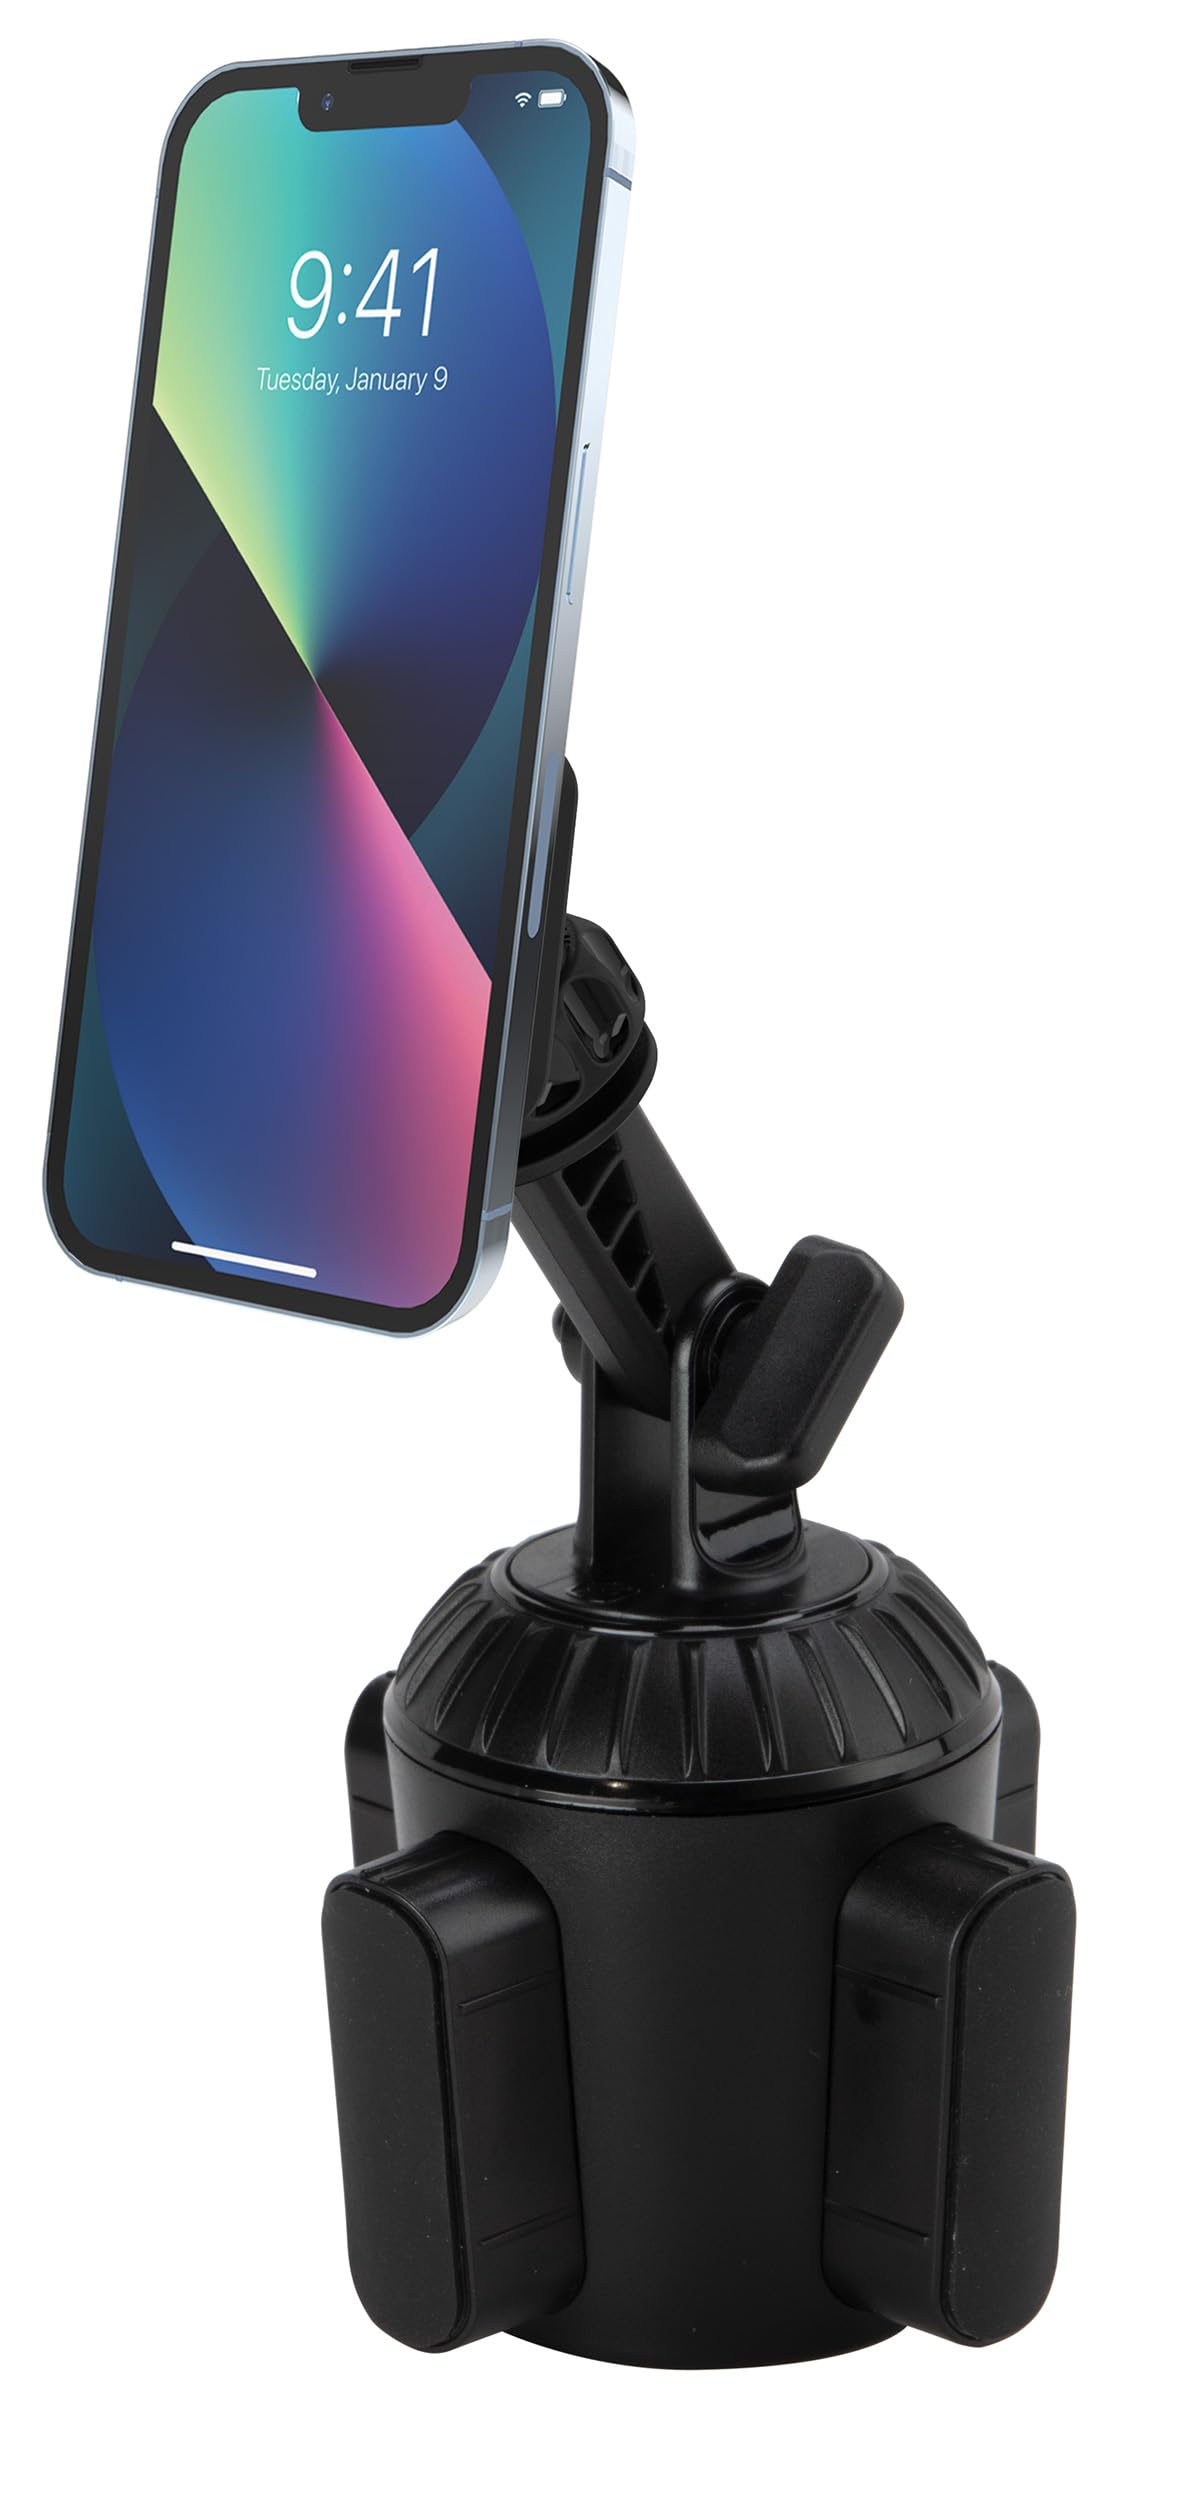 Scosche MAGCUP2M-SP1 Magnetic Cup Phone Holder Mount for Mobile Devices, Adjustable Universal Base for most Vehicle Cupholder sizes, Black